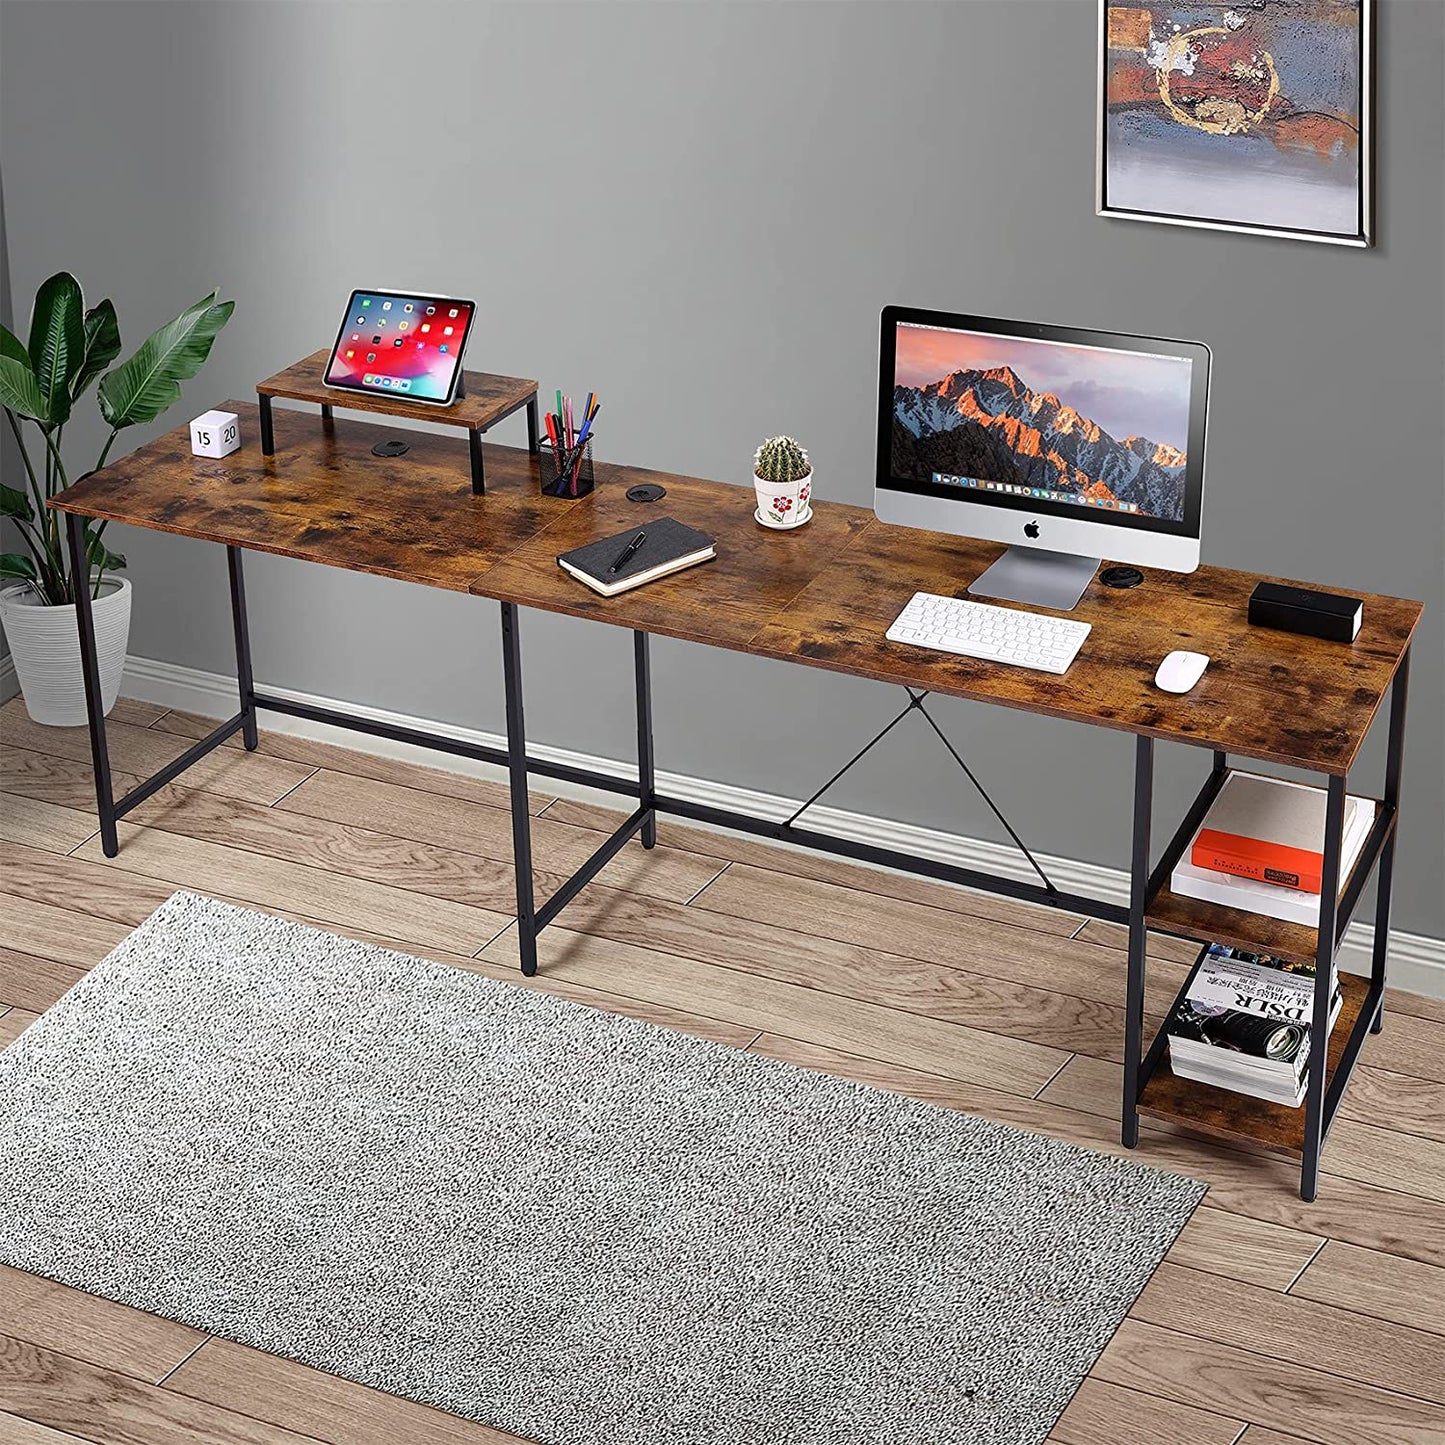 UNICOO - L Shaped Computer Desk, Modern Corner Computer Desks with CPU Stand Adjustable Shelves for Home Office Study Writing Gaming Wooden Table Workstation (SYK-03-L)